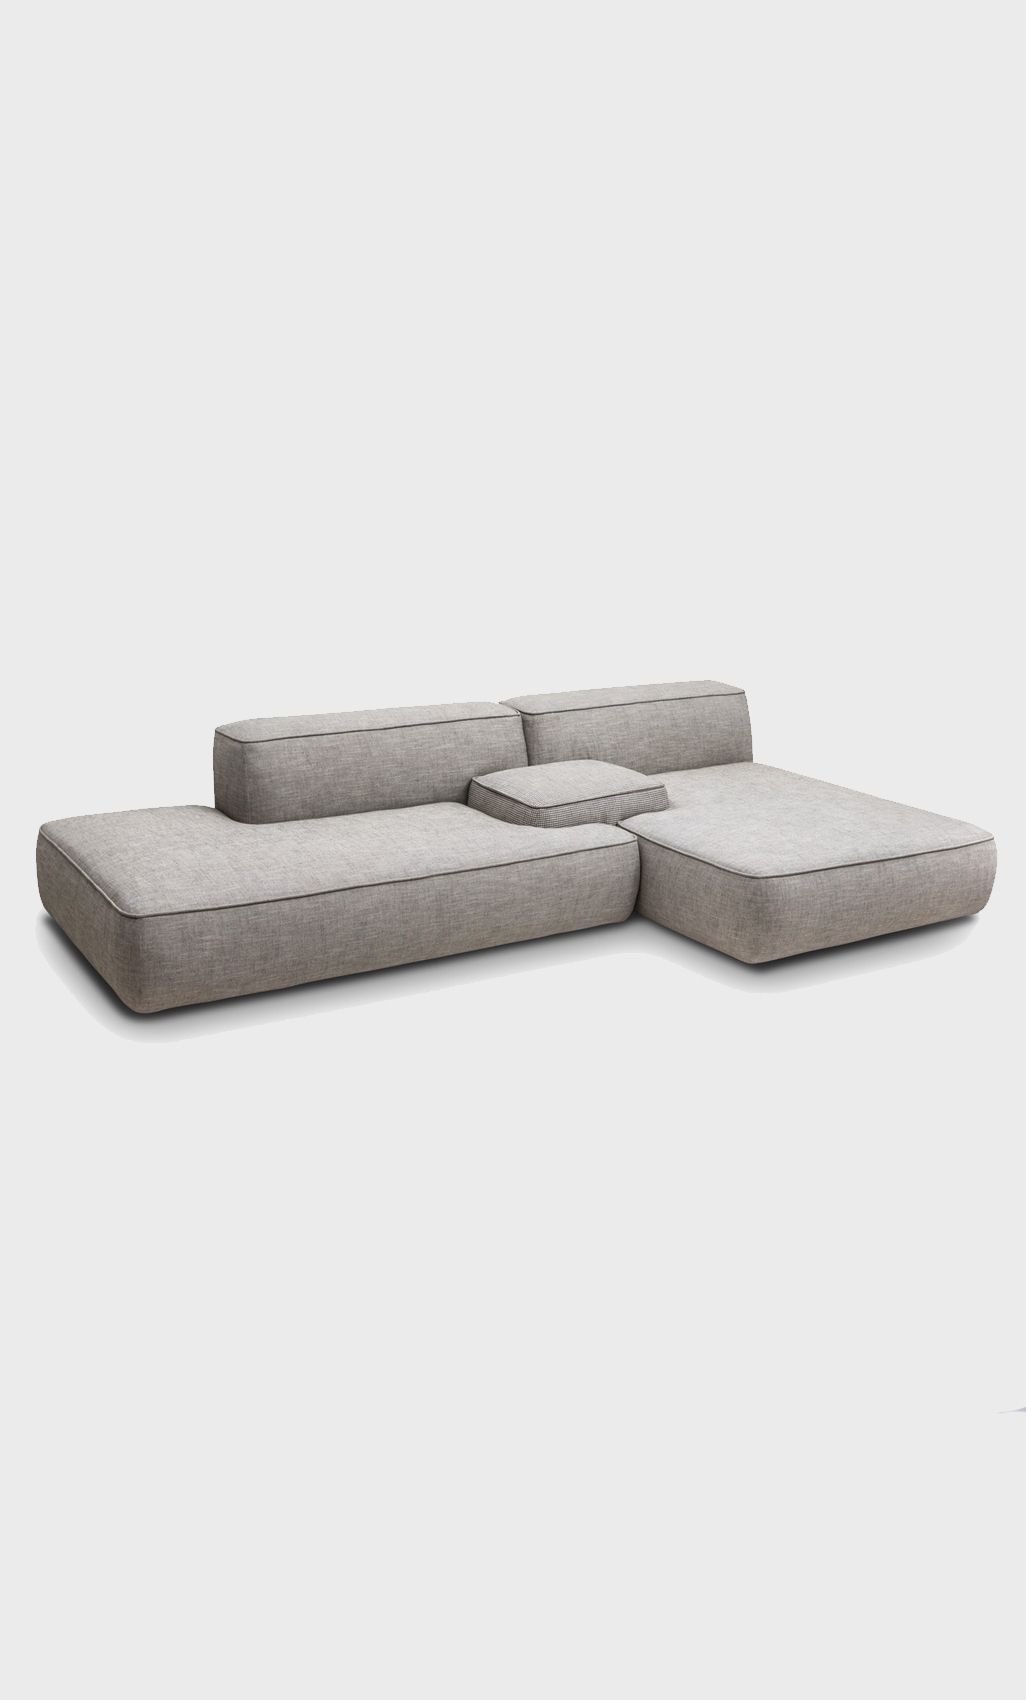 Modular Sofa: No Legs Or Really Small Low Legs | Furniture 2 Within Low Sofas (View 5 of 10)